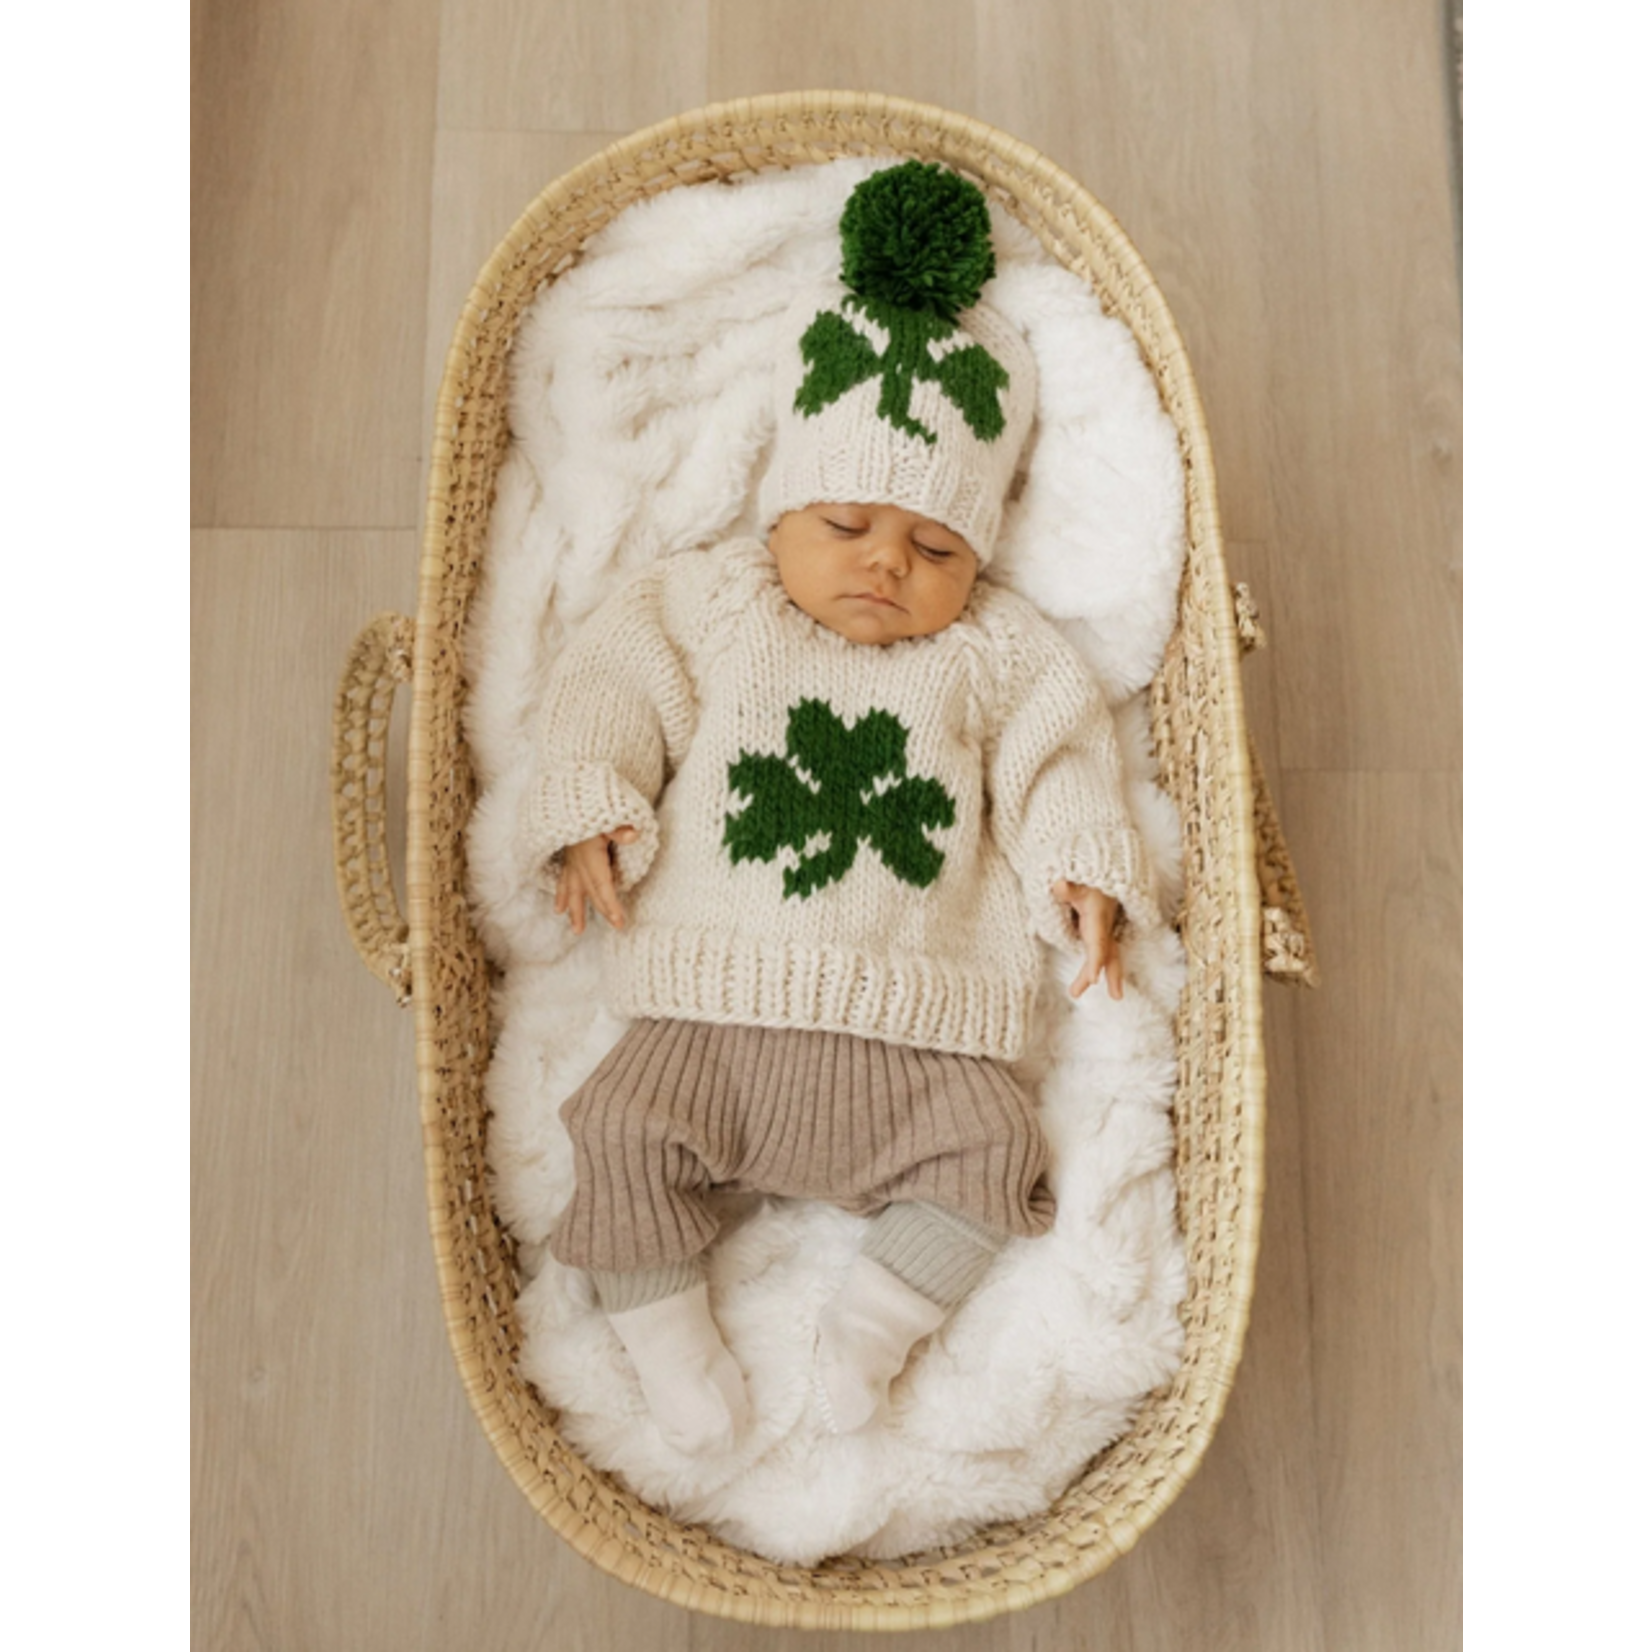 HUGGALUGS St. Patrick's Day Knit Beanie